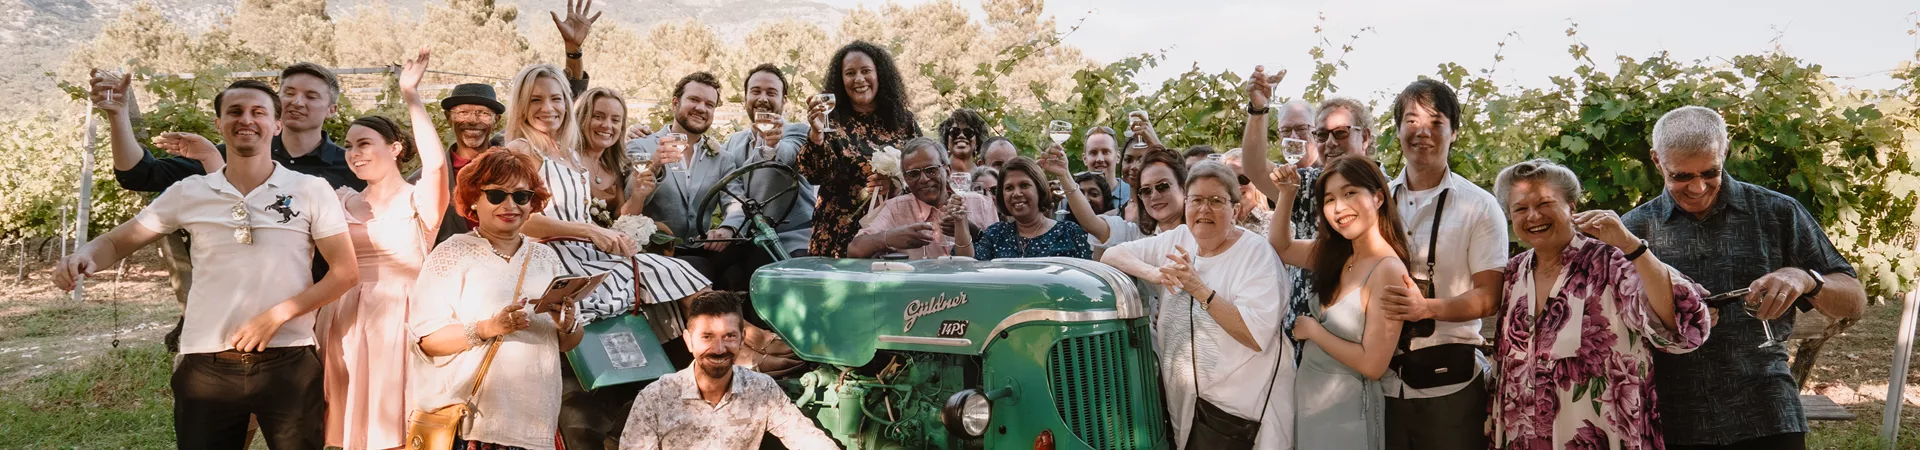 Multi generational group of travelers posing next to a tractor